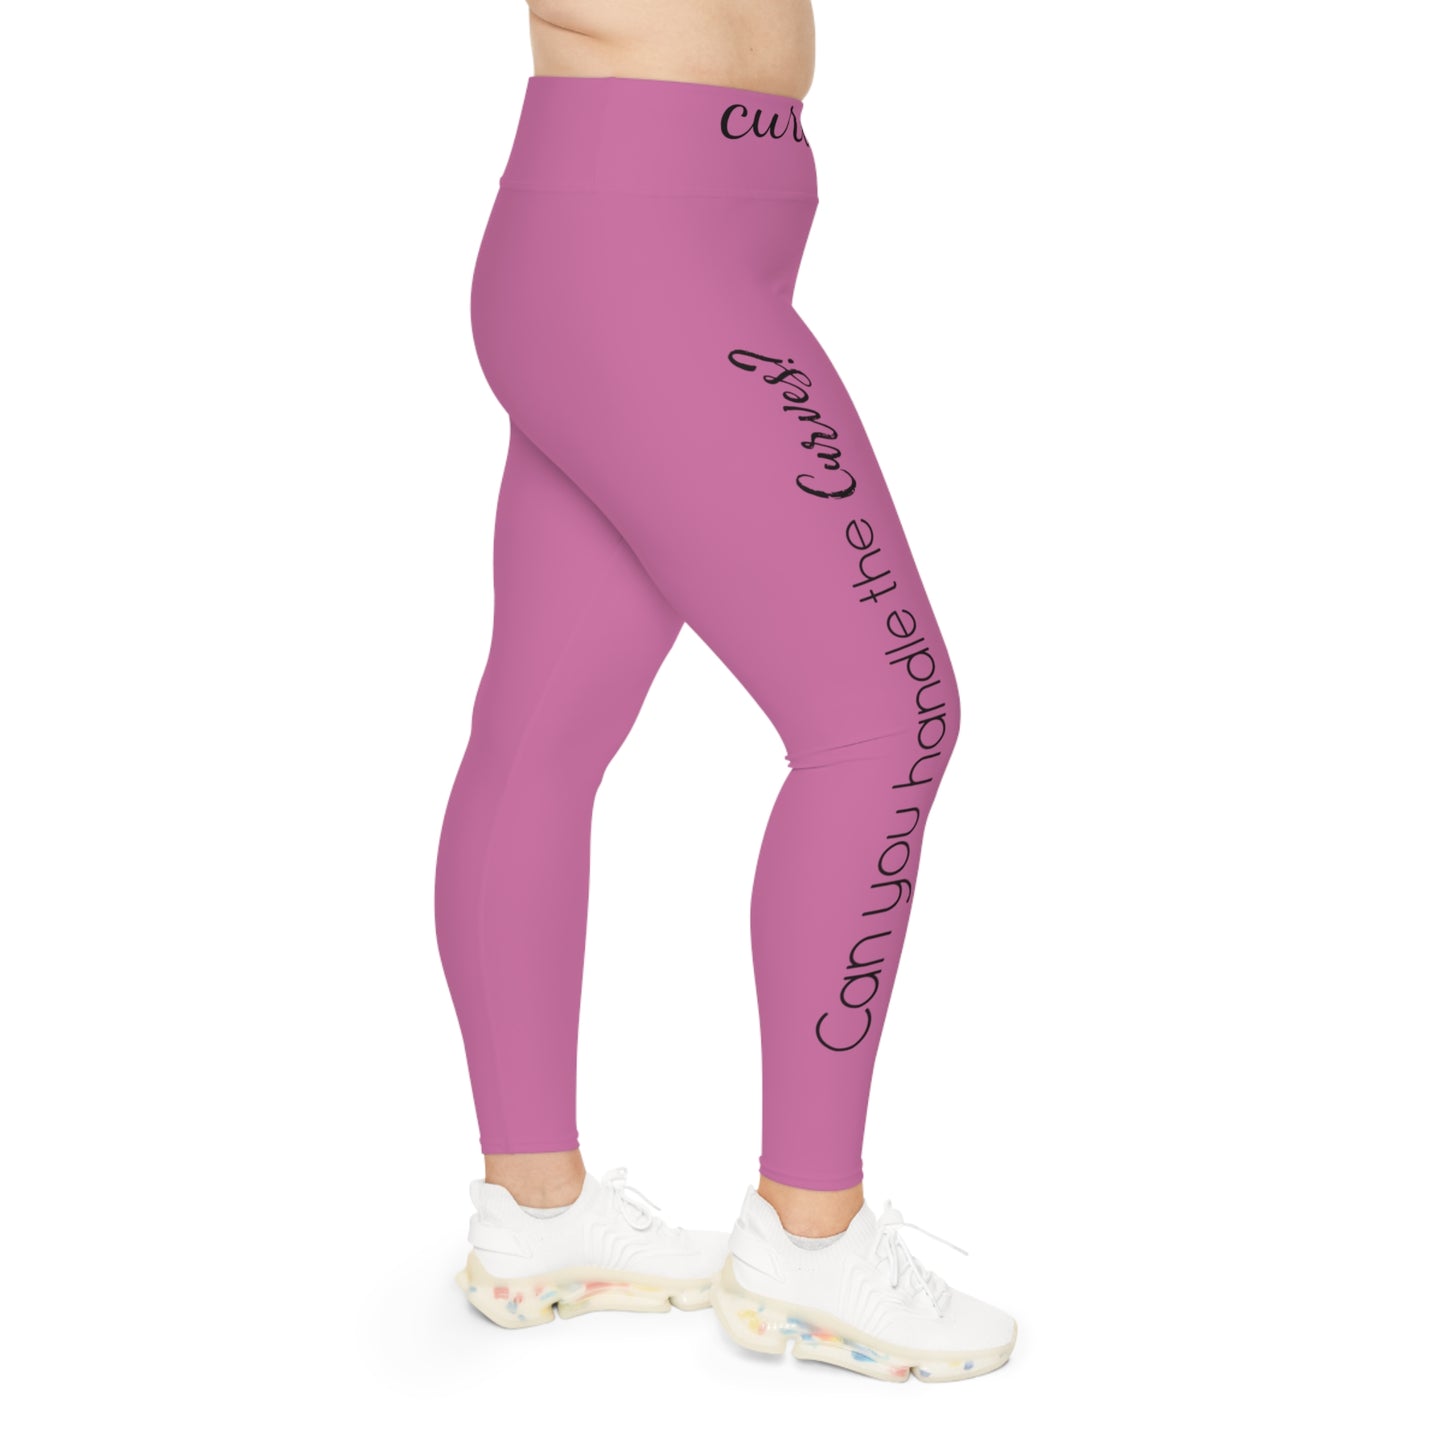 Can you handle the curves? Pink: Plus Size Leggings